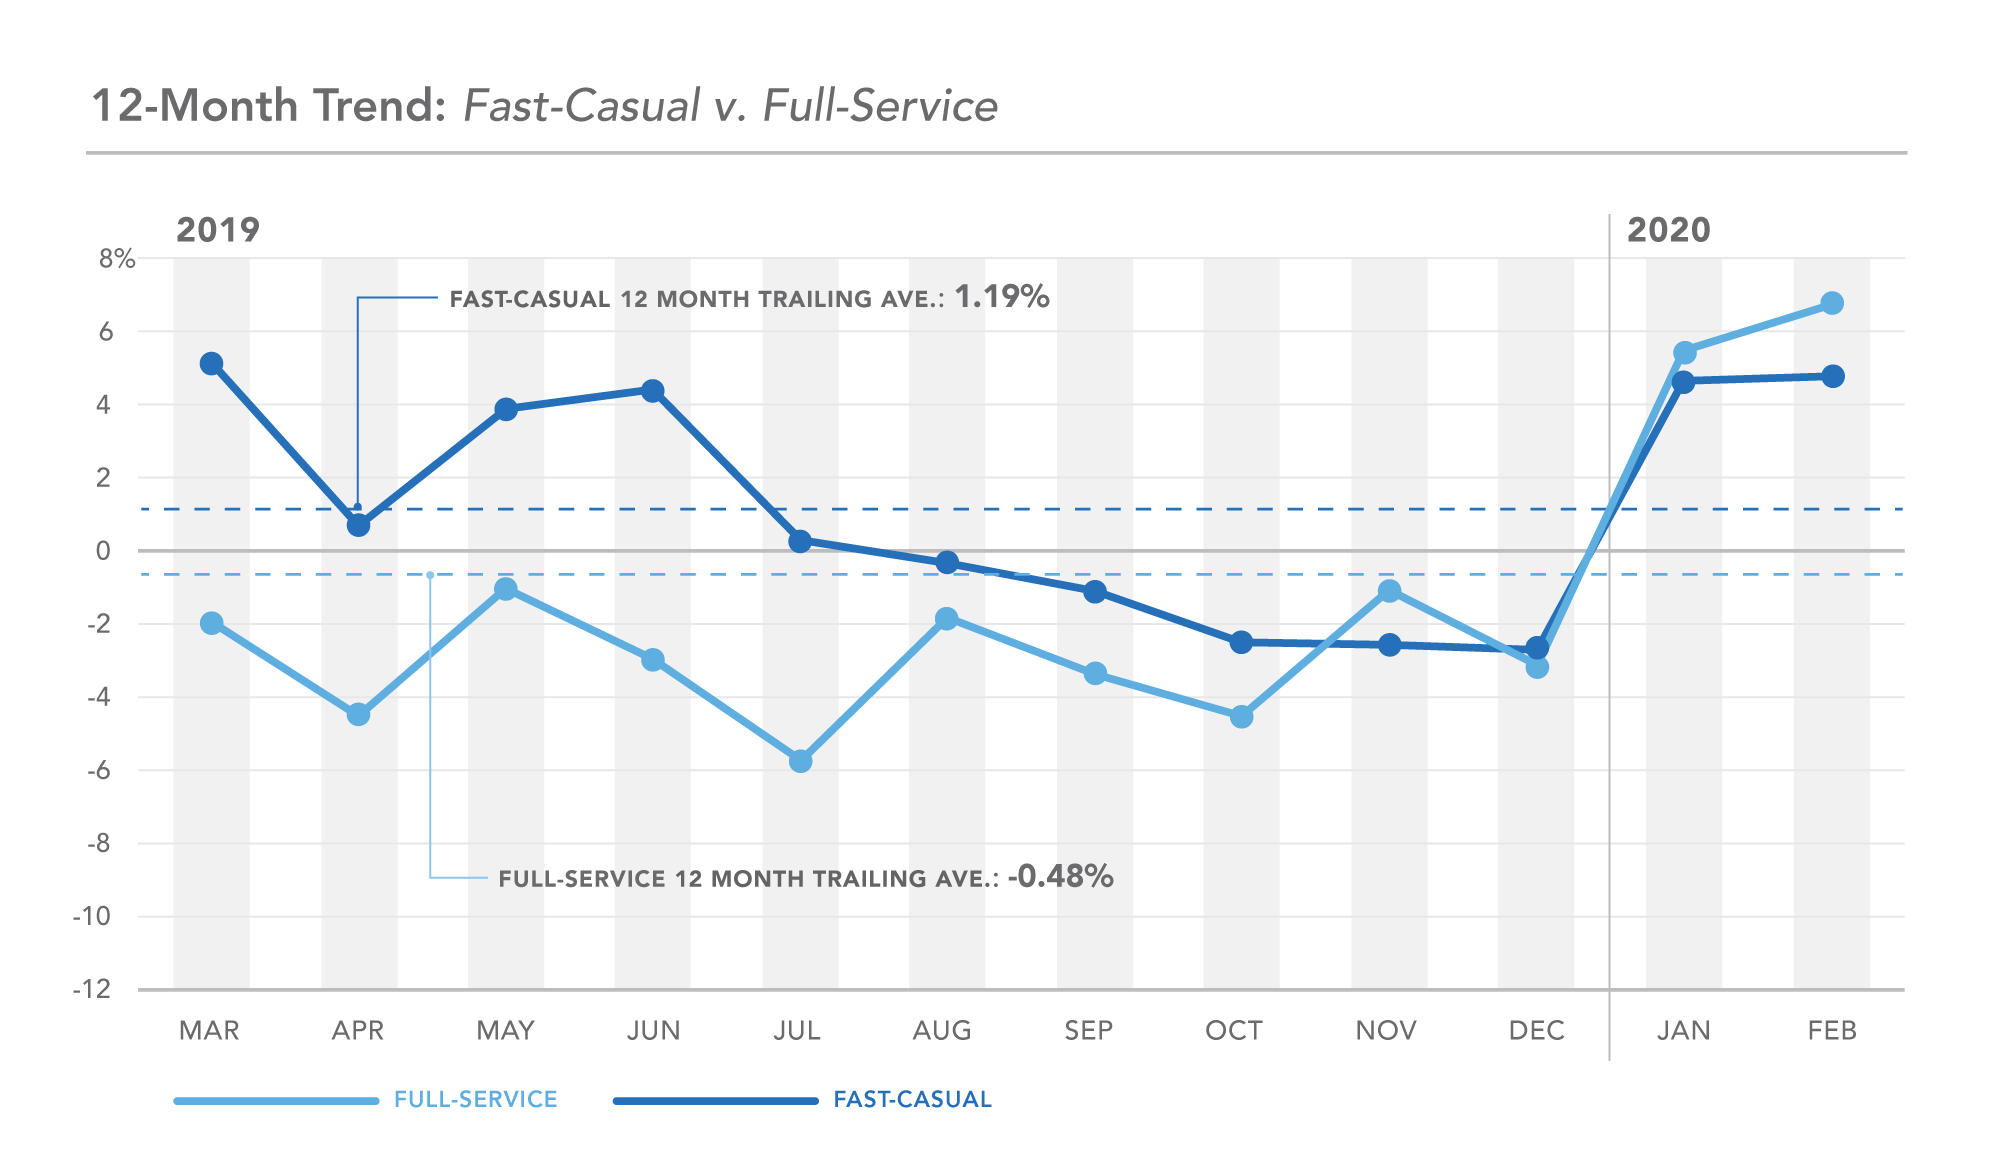 DC 12-month trend, fast casual v full service